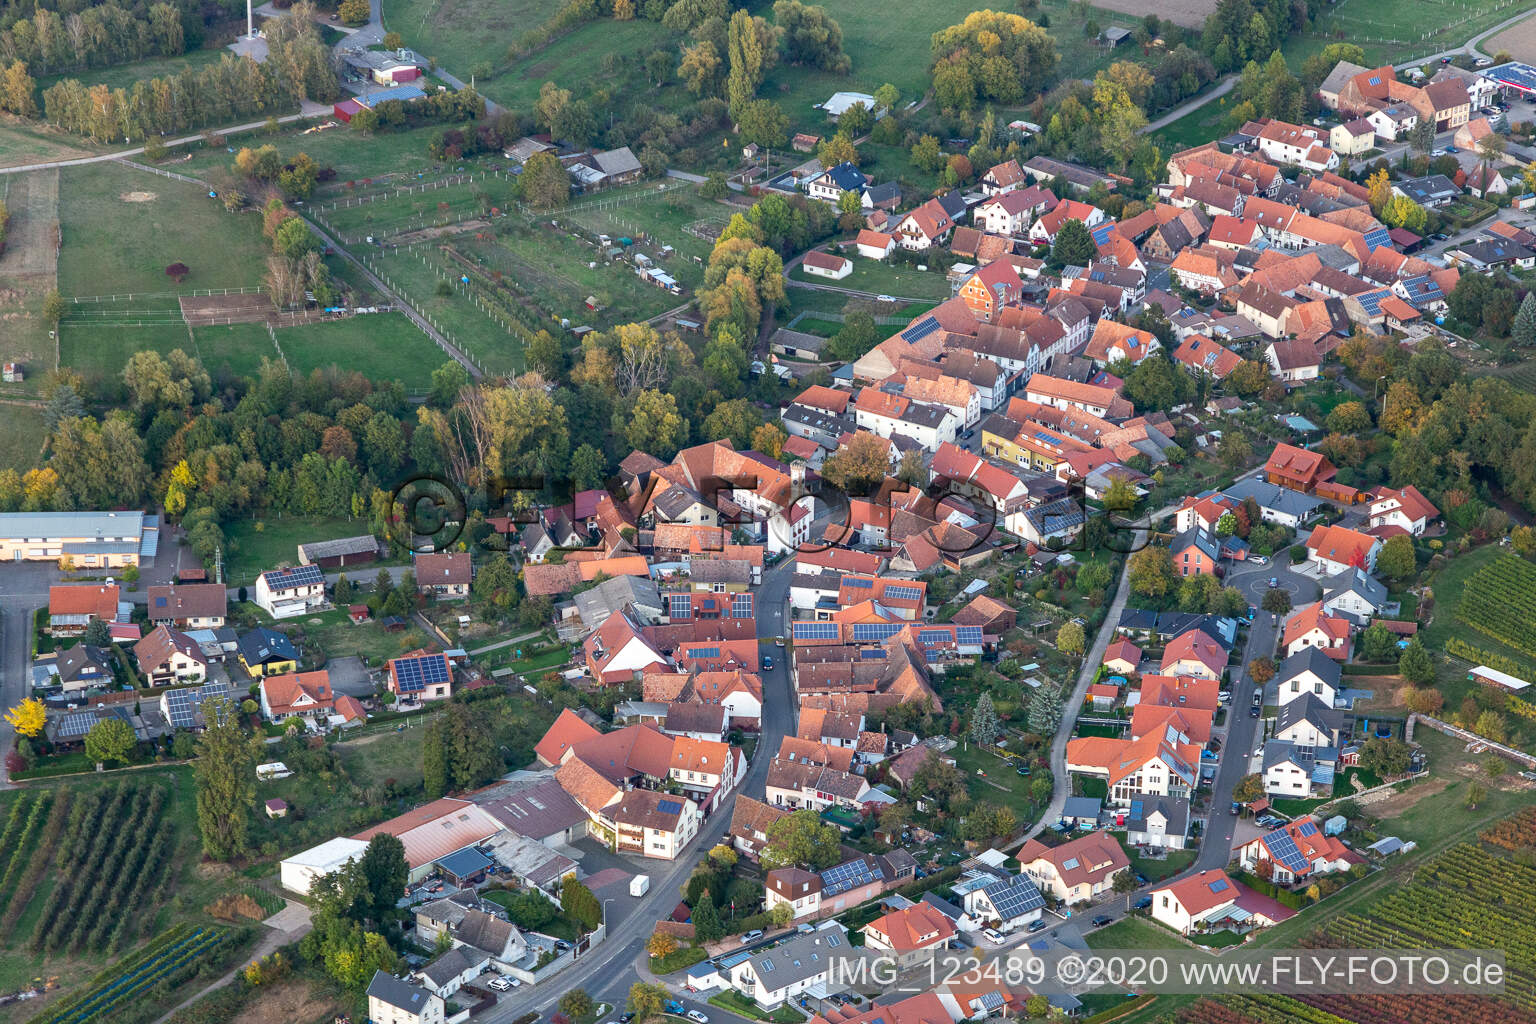 Oberhausen in the state Rhineland-Palatinate, Germany viewn from the air